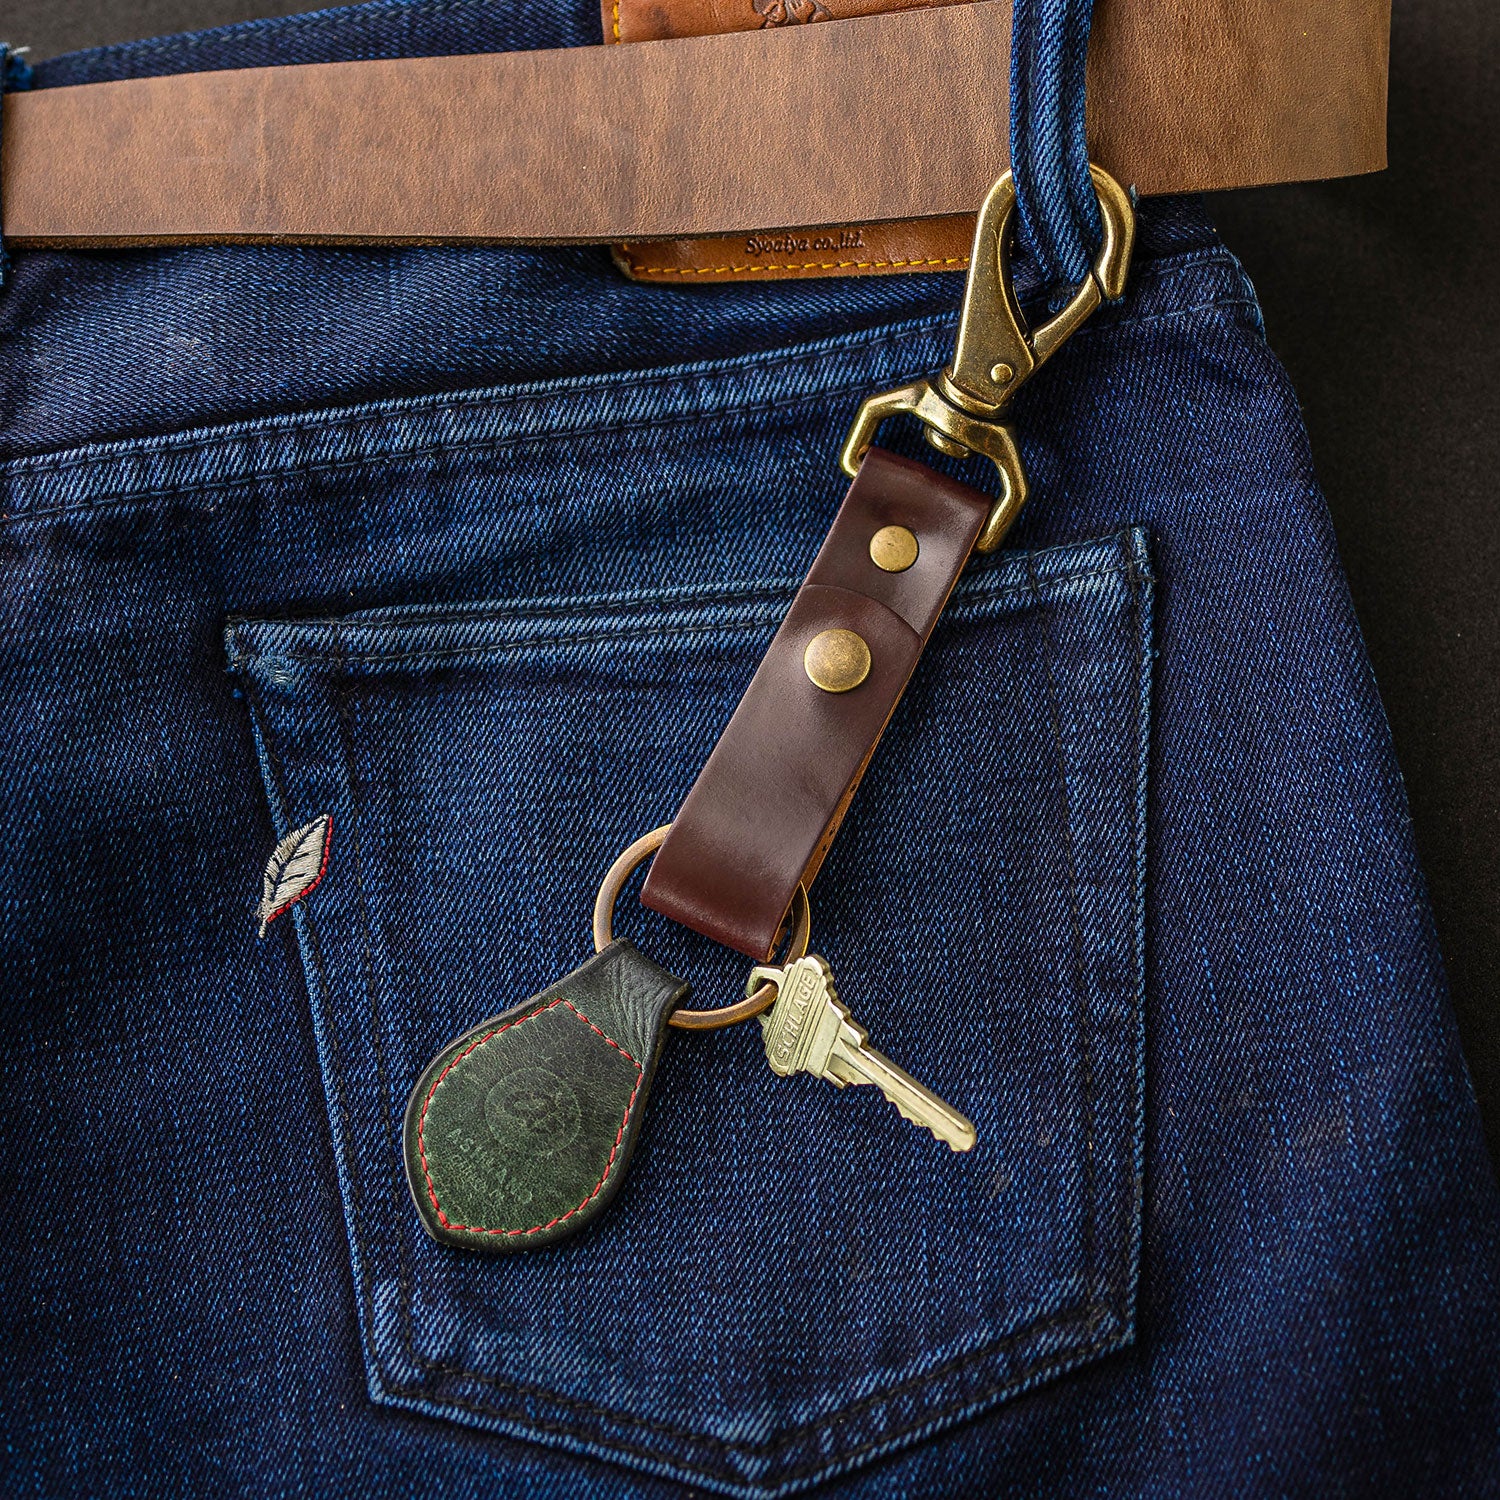 Leather Keychain with Belt Loop Clip PJ18 – Viperade